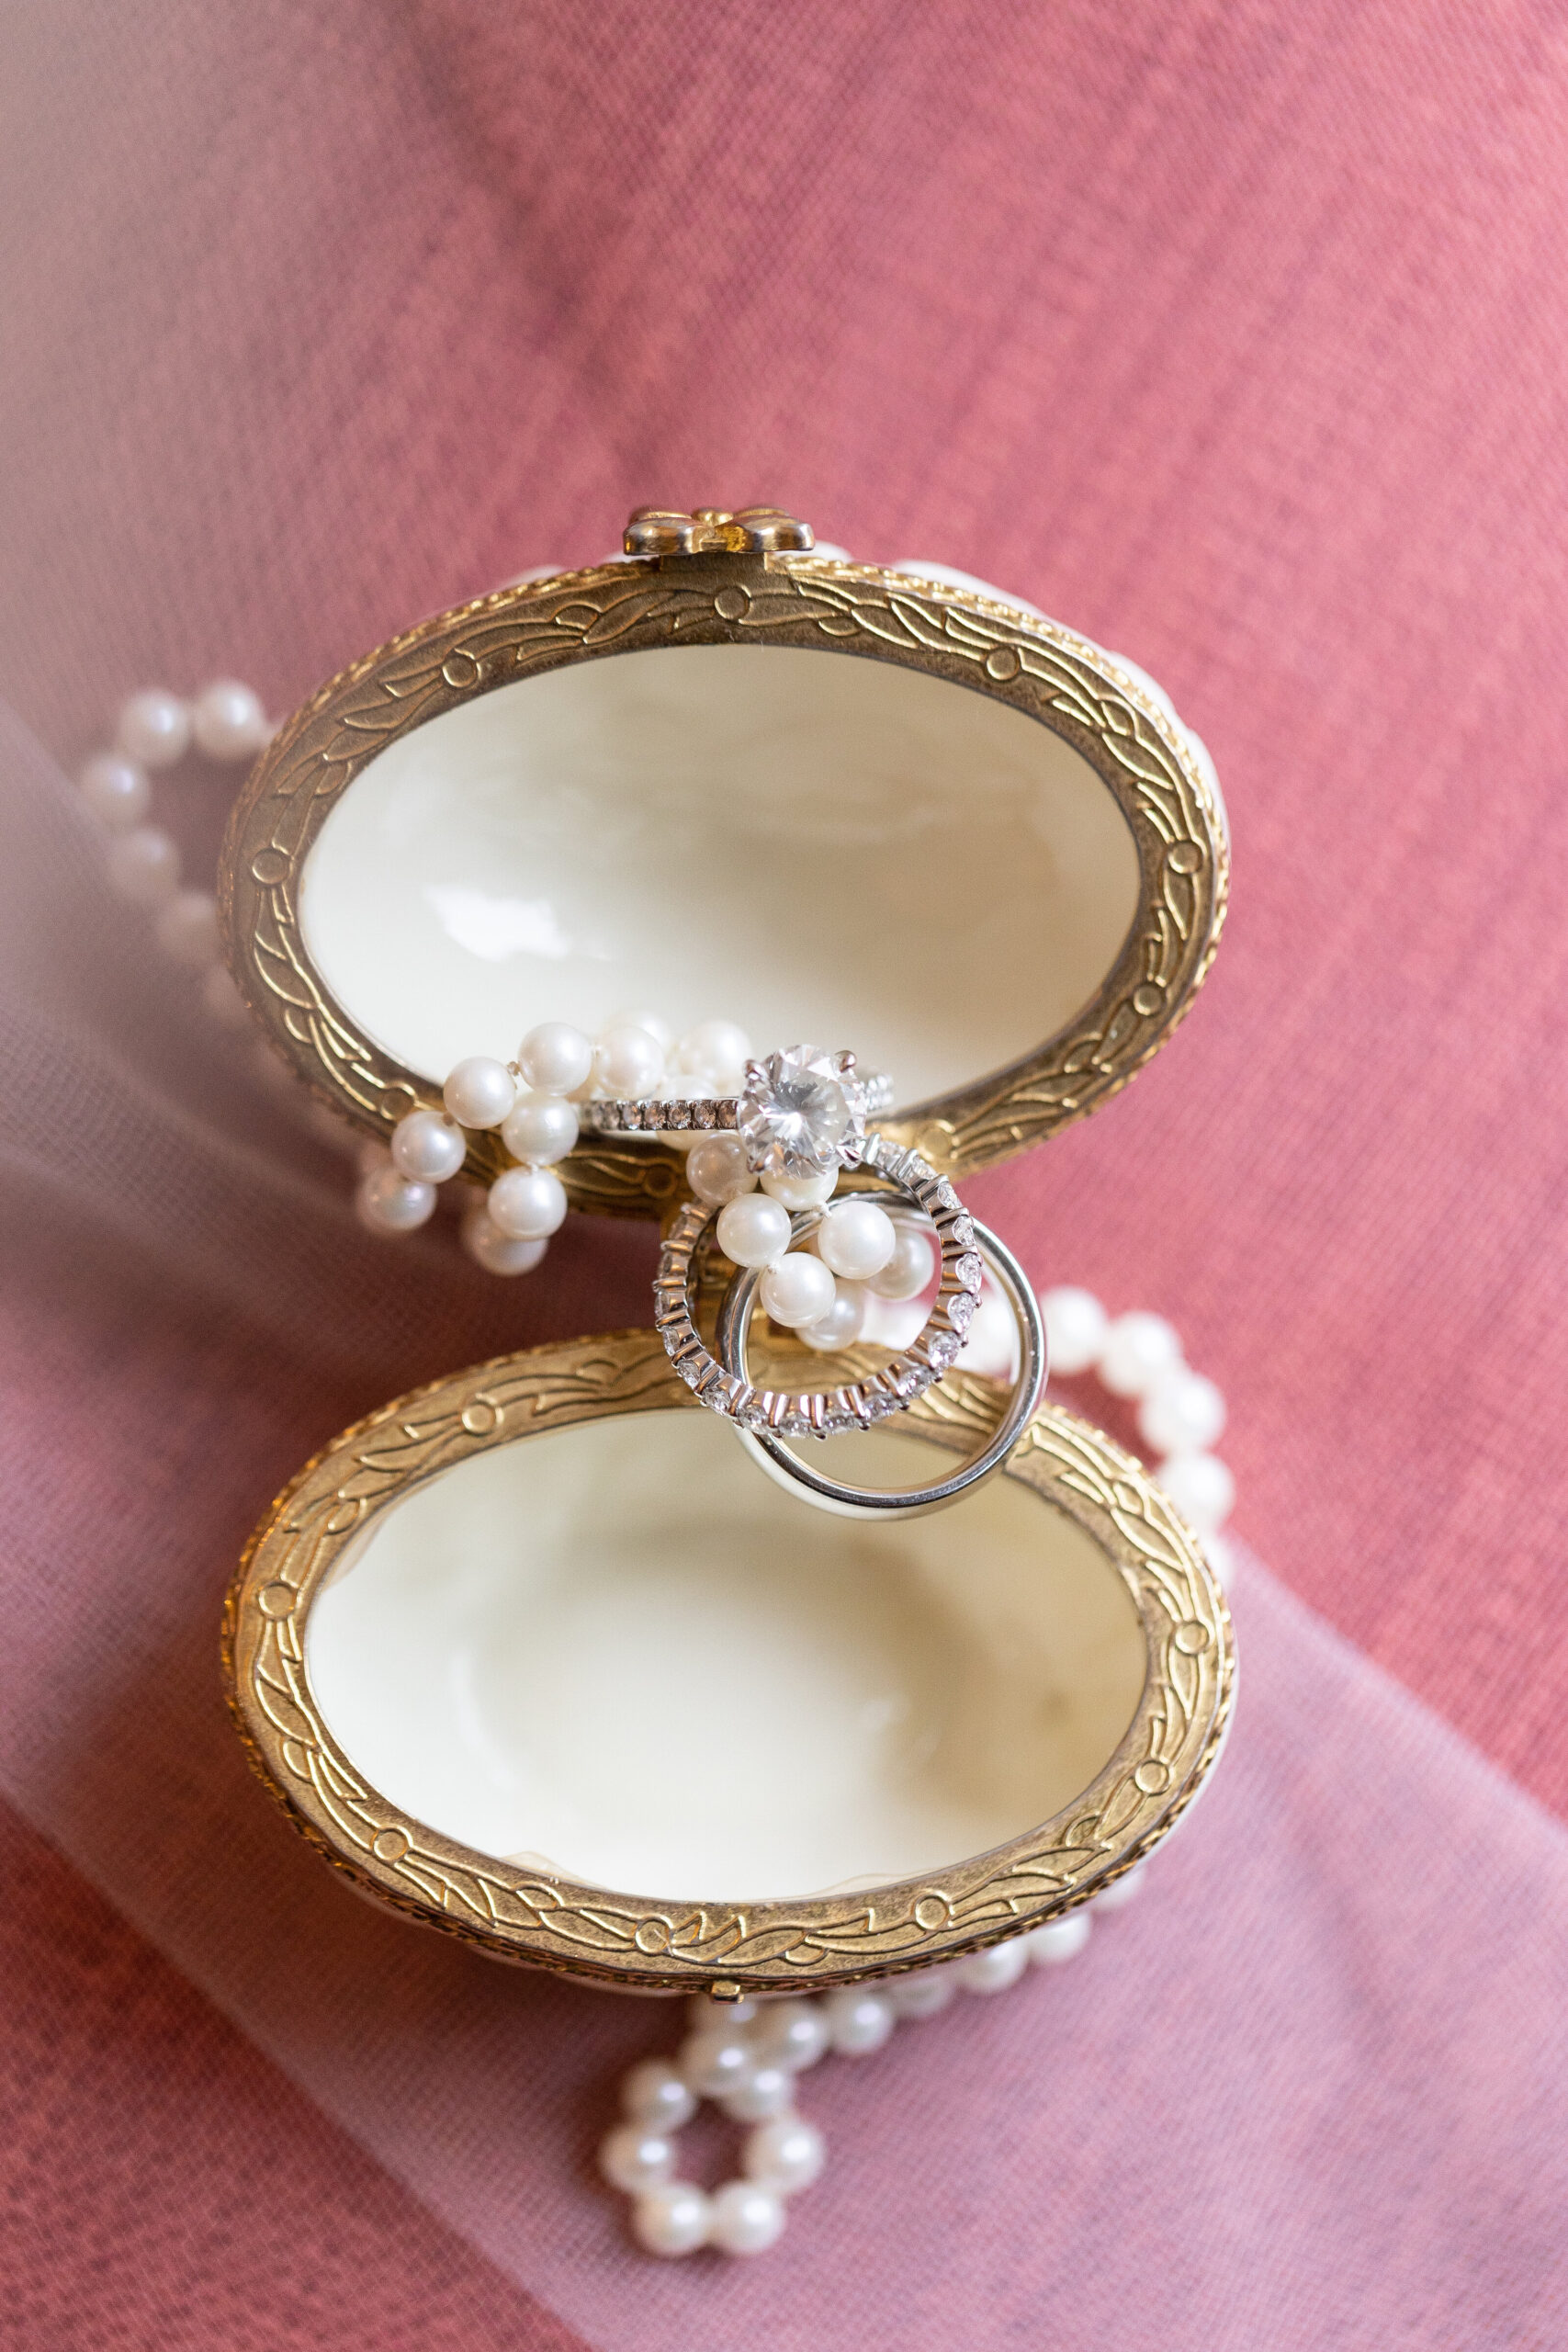 Ring detail shot with draped pearl necklace and clamshell jewelry case at arrowhead bed and breakfast